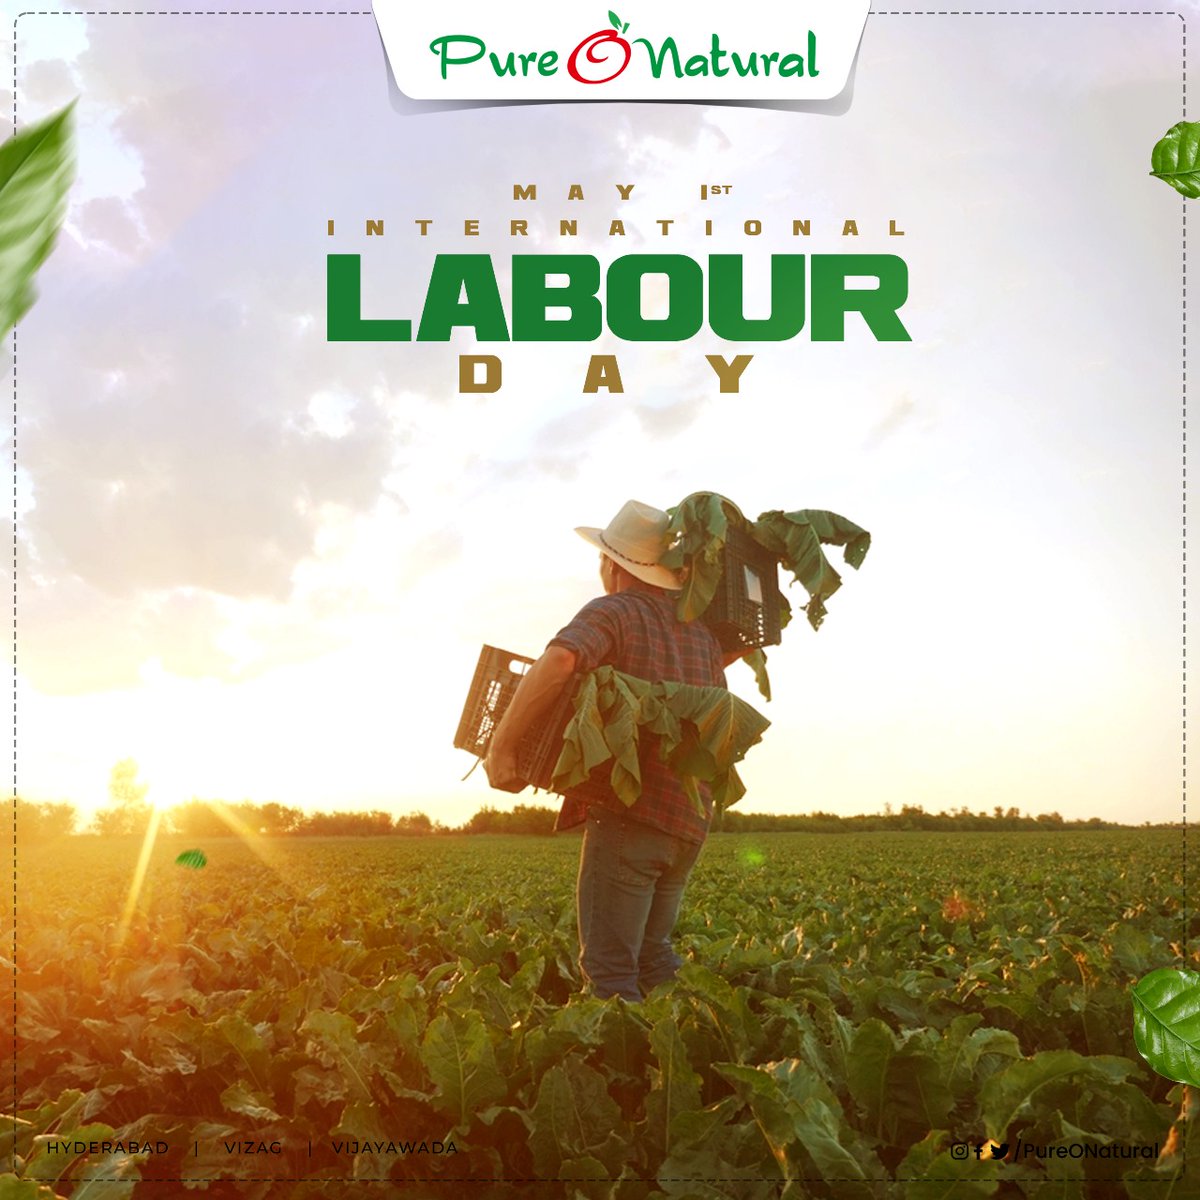 To all the workers out there, thank you for your endless effort. Happy Labour Day! ✊

#PureONatural #Hyderabad #Vizag #Vijaywada #MayDay #LabourDay #InternationalLabourDay